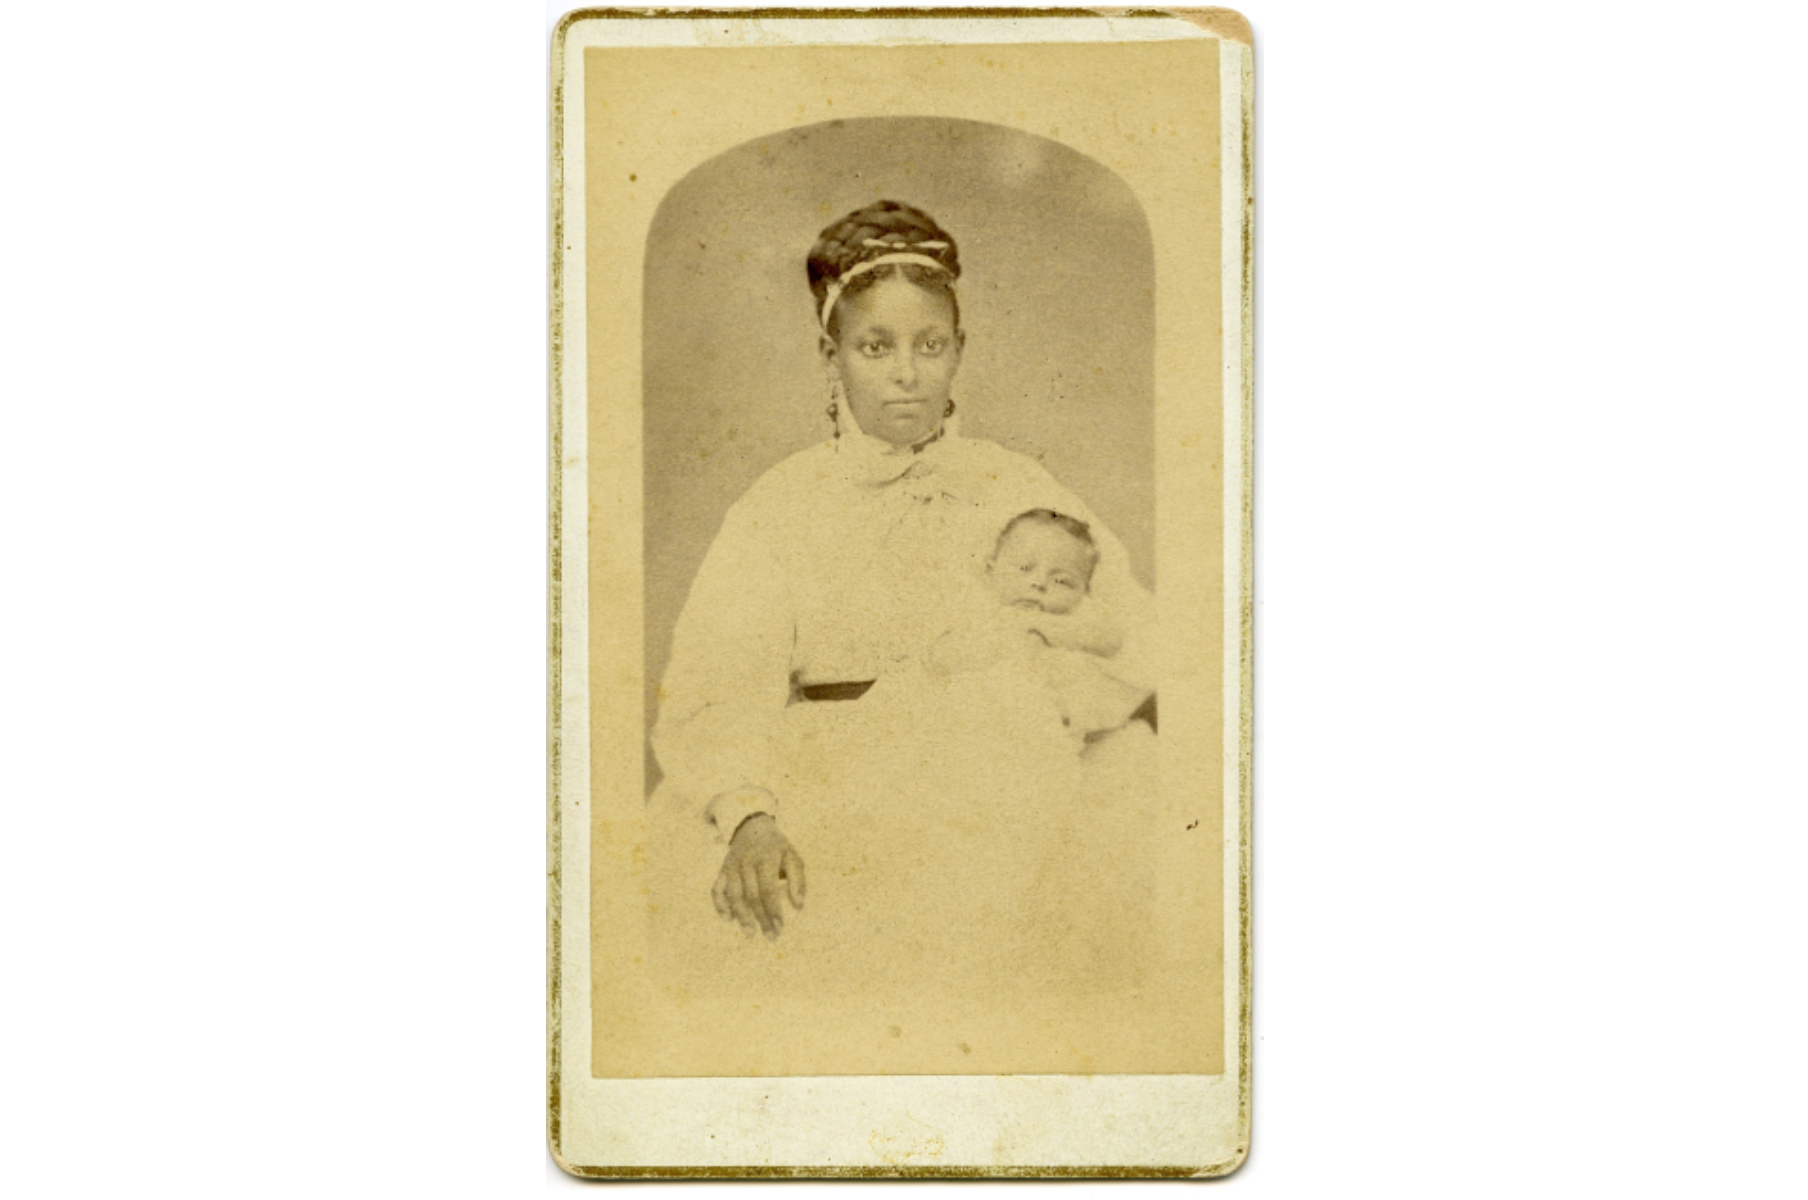 sepia toned vintage portrait of a Black woman from the late 1800s